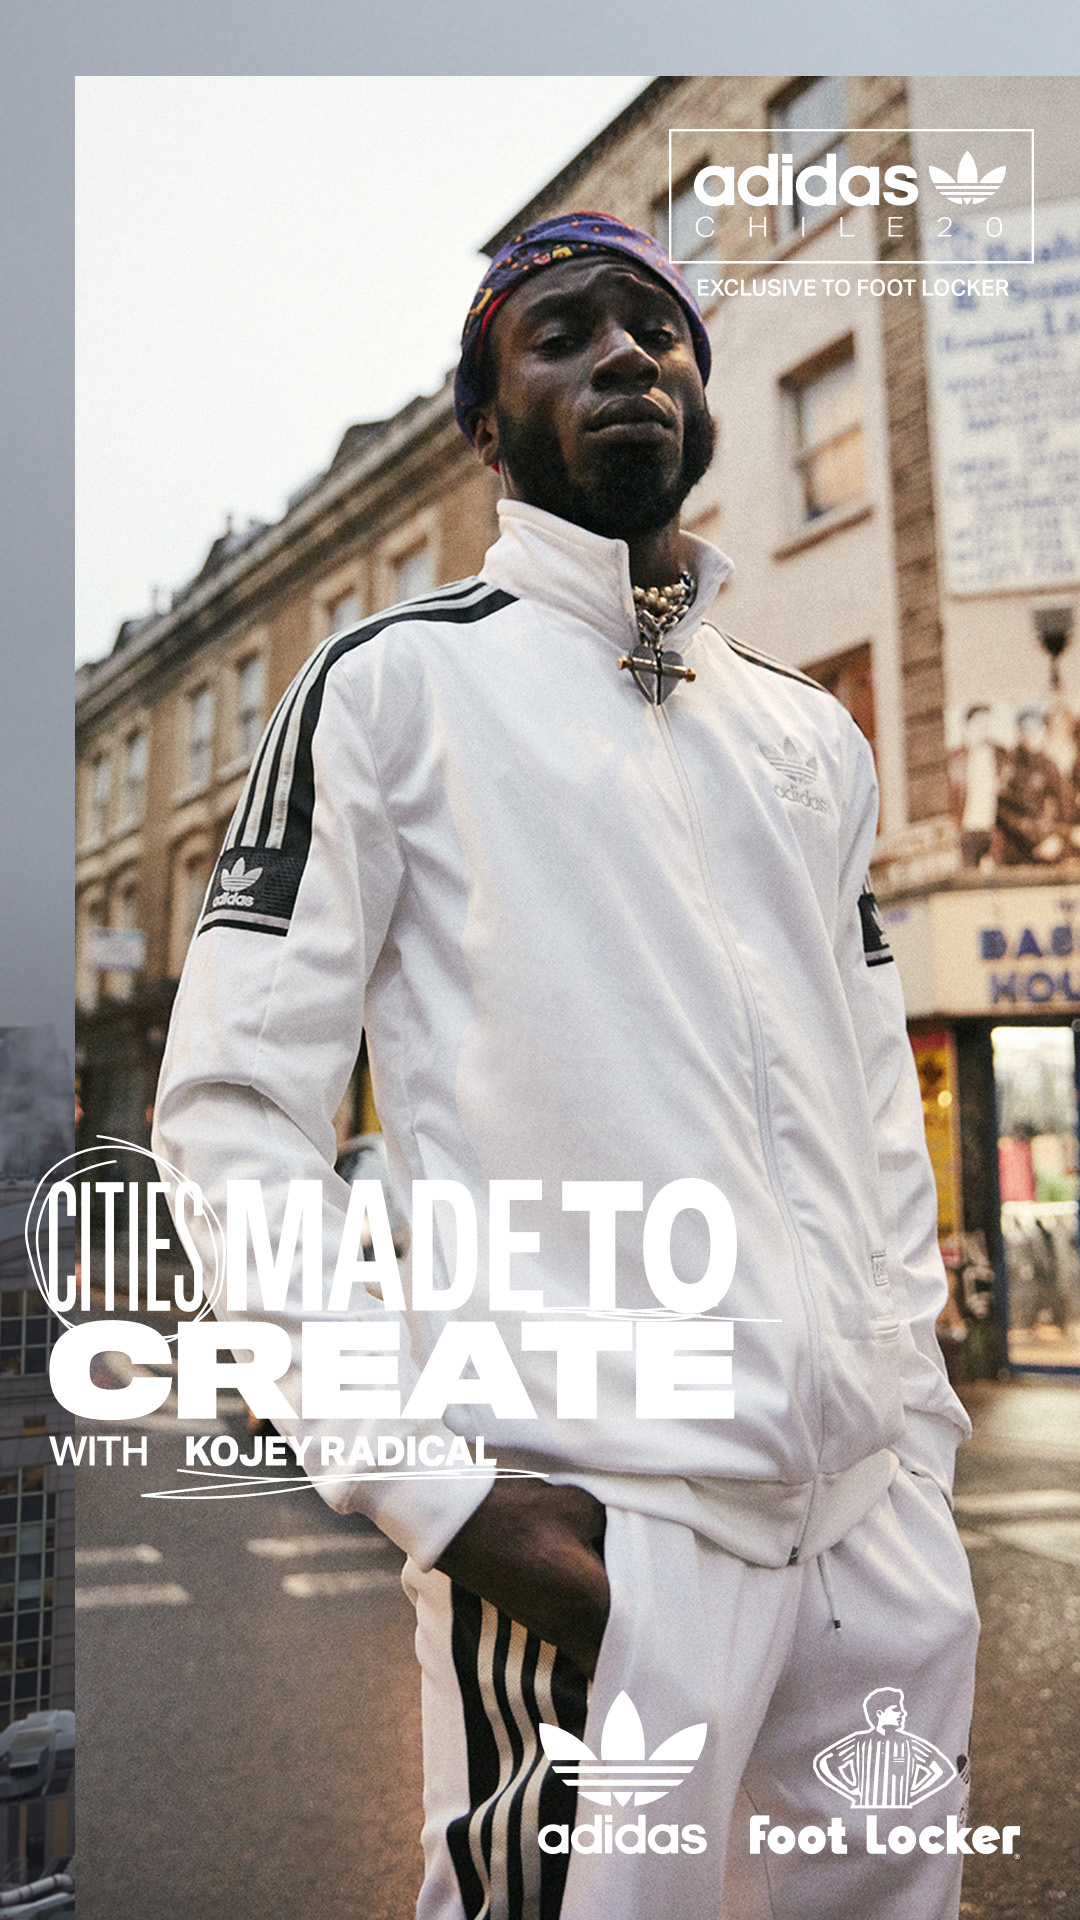 credit Heel veel goeds Kaap 84.Paris launches "Cities Made To Create" to promote CHILE 20, the  exclusive adidas original x Foot Locker collection Adland®